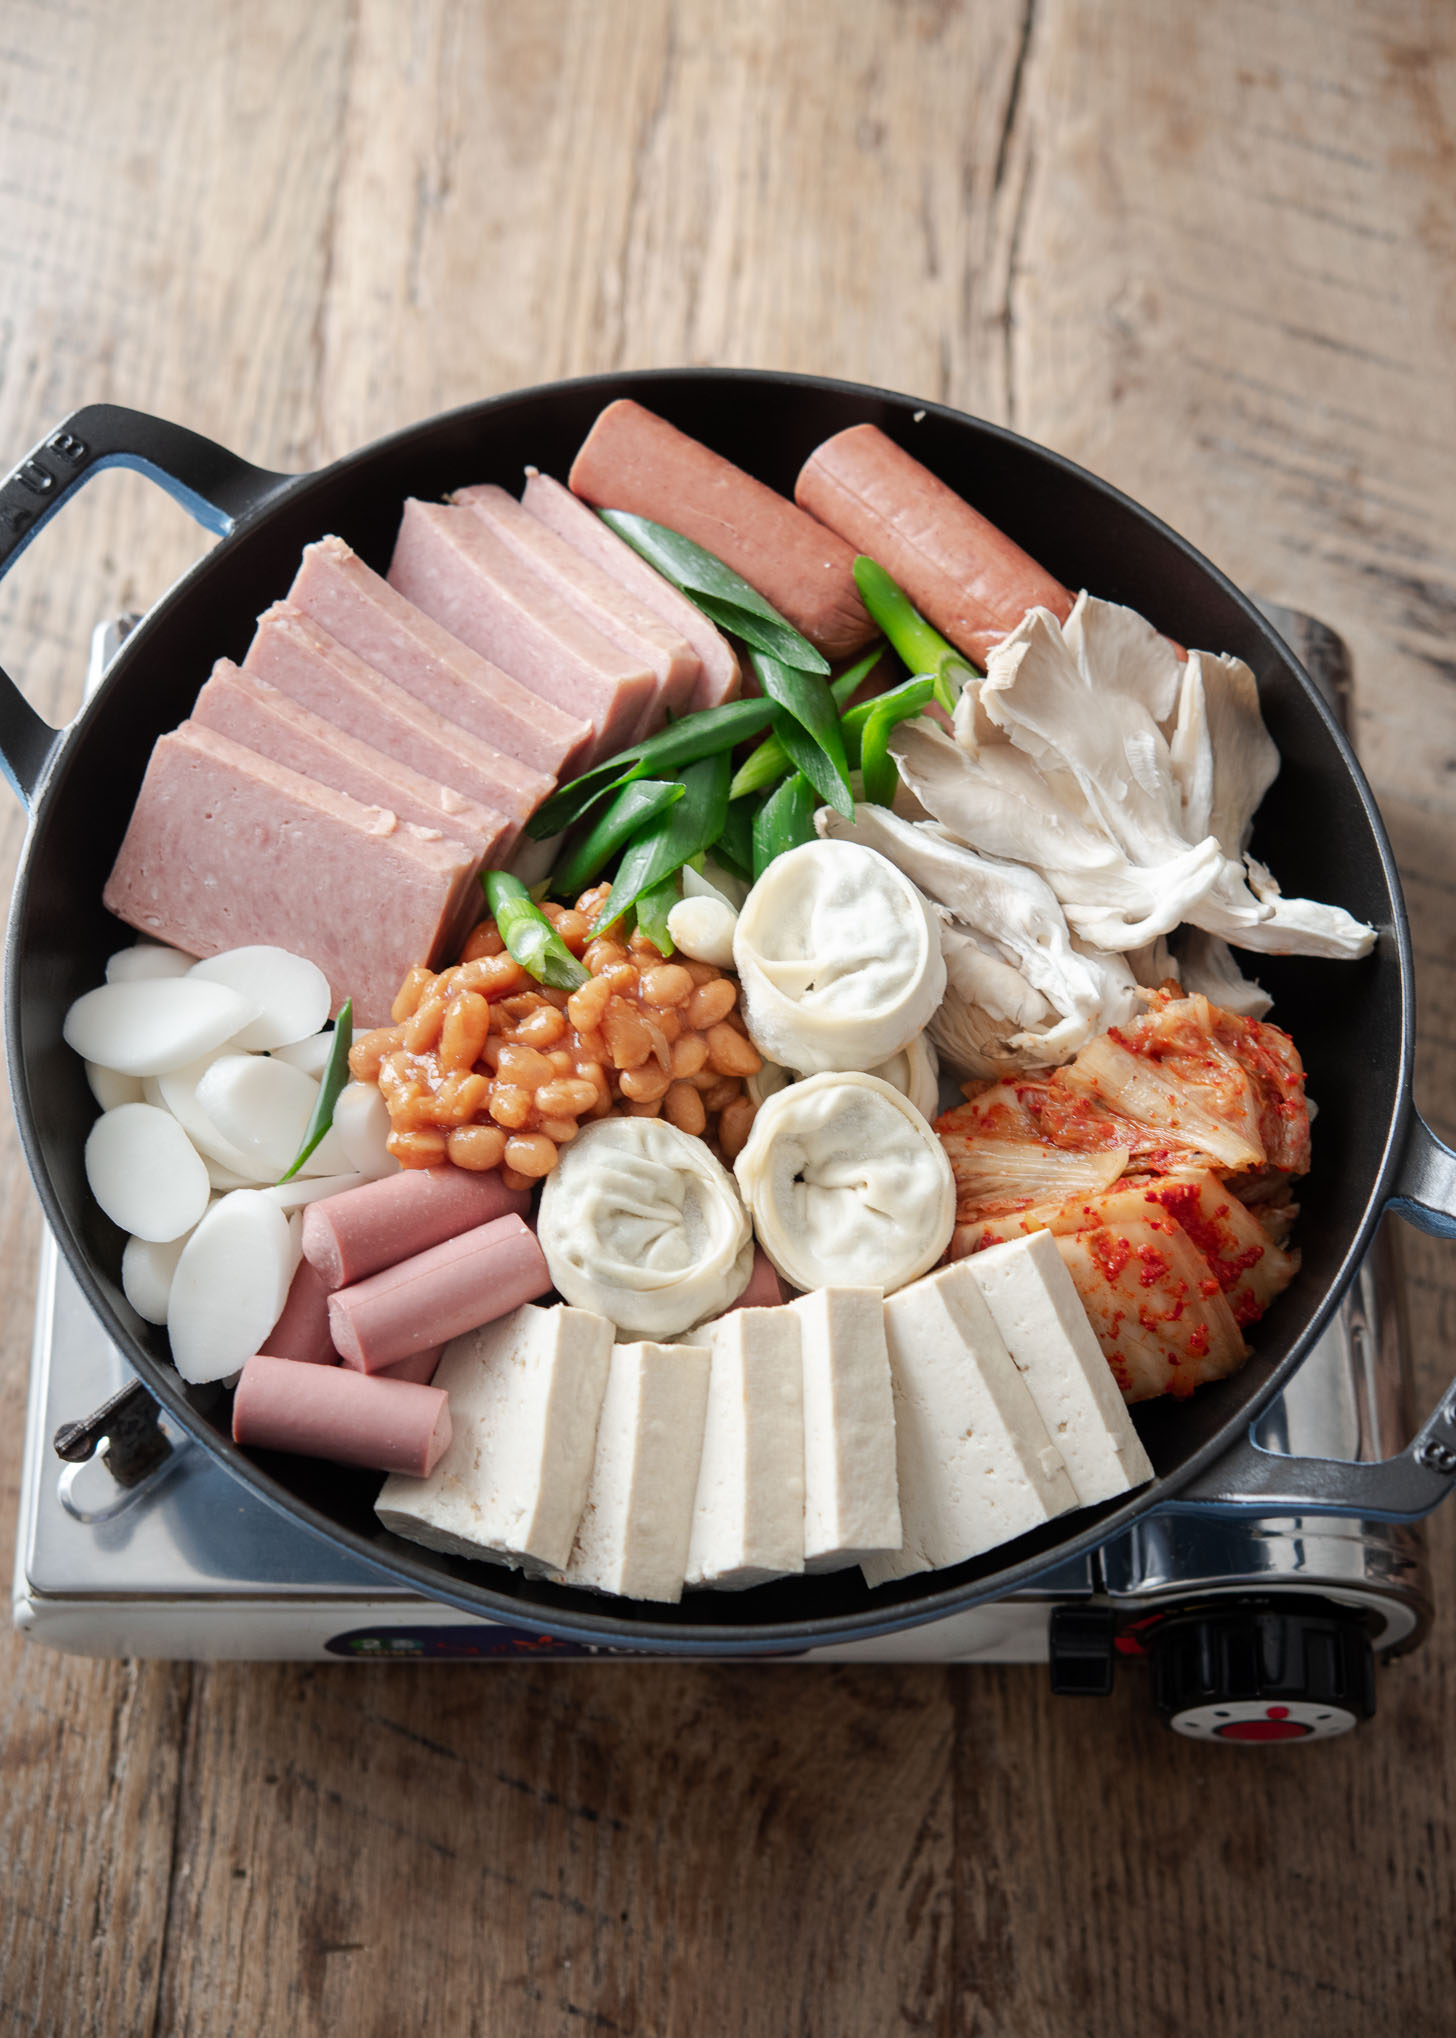 Army stew (Budae jjigae) ingredients are arranged in a pan.